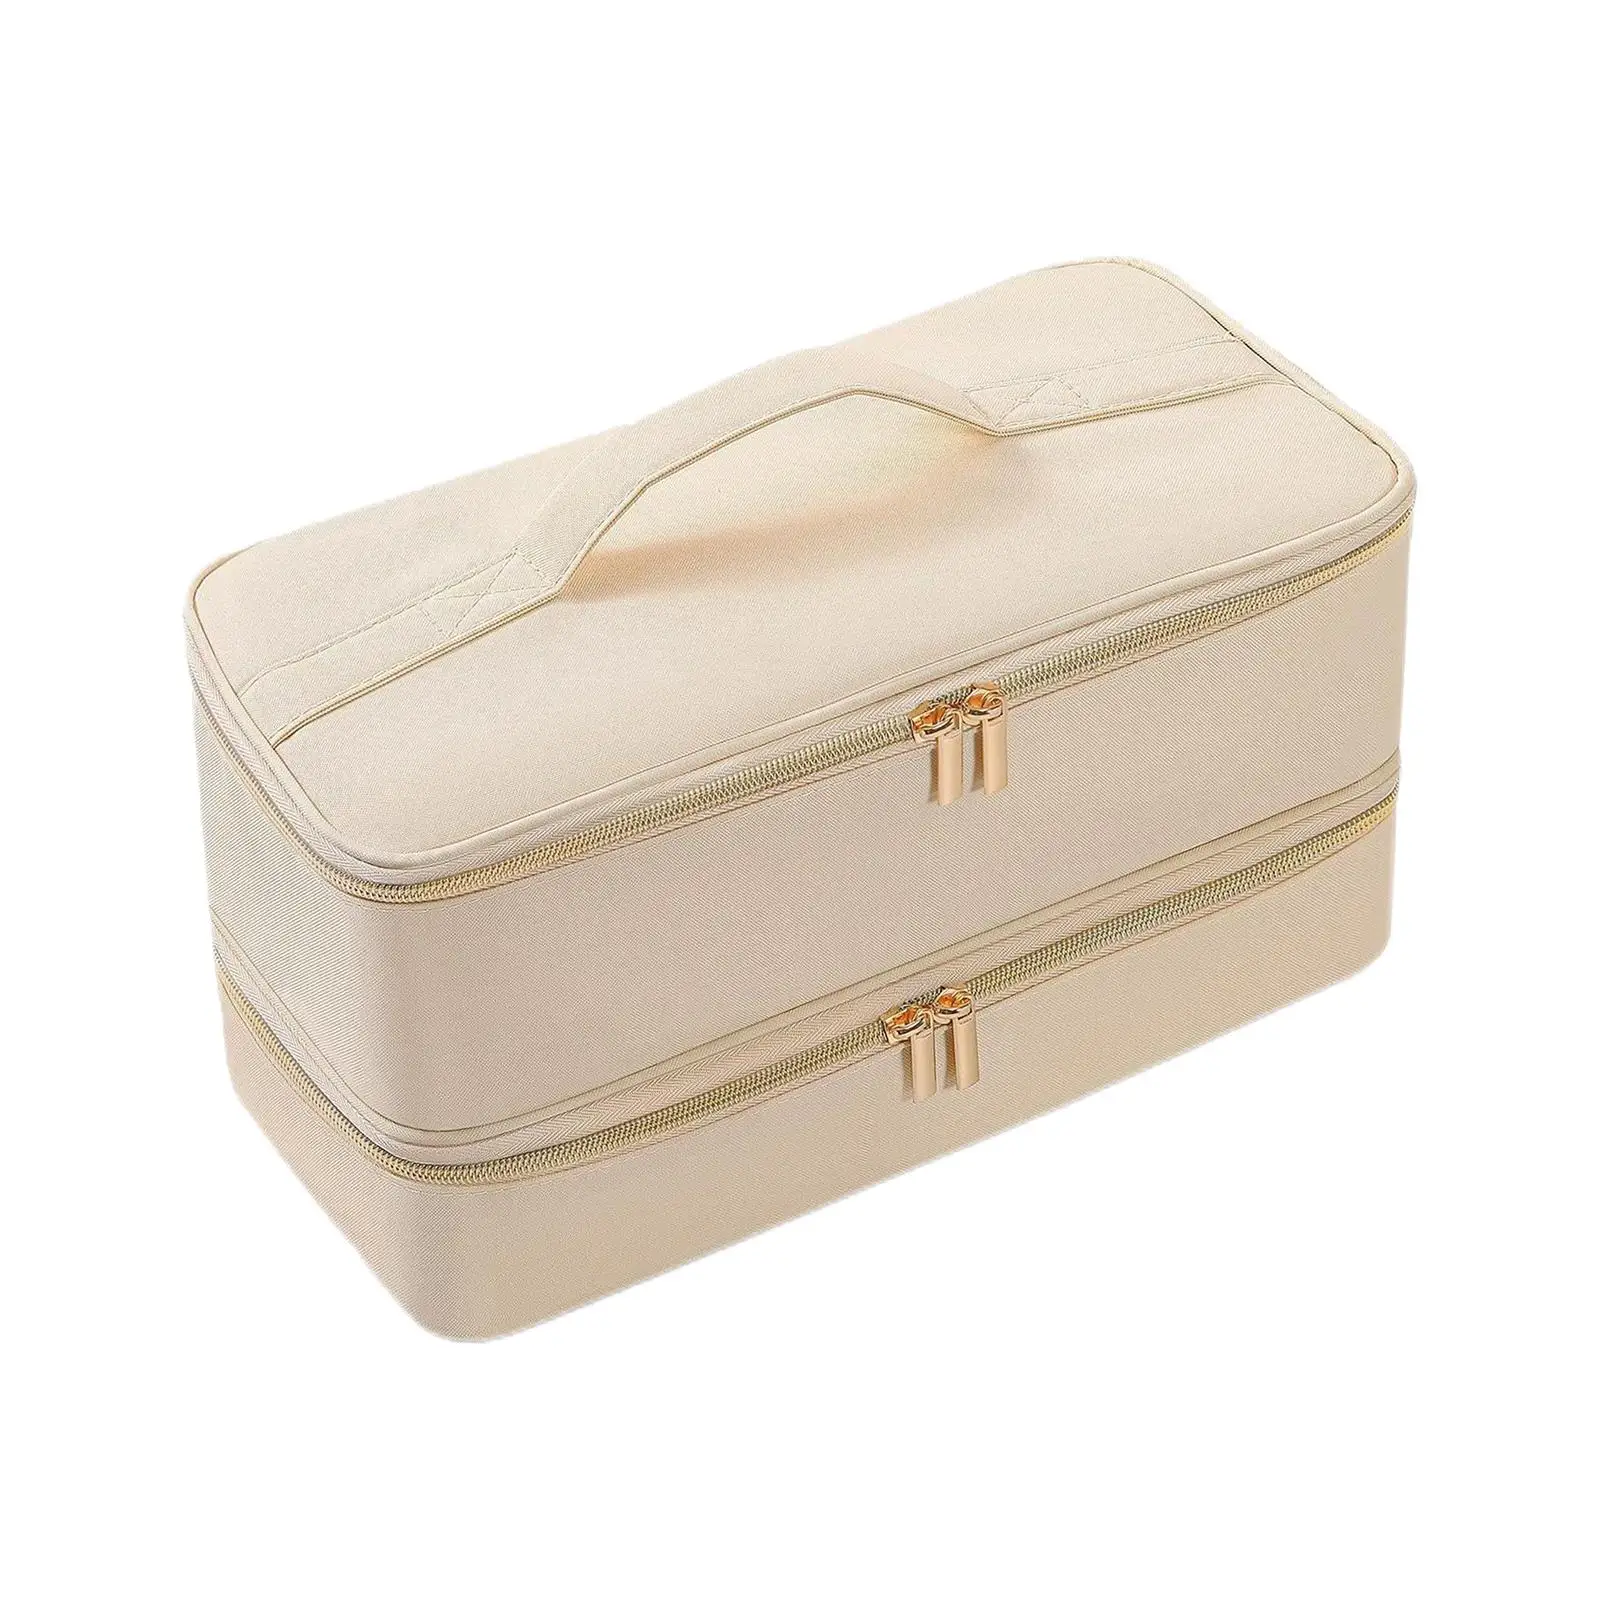 Double Layer Travel Carrying Case for Bathroom Hair Dryer Brush Attachment